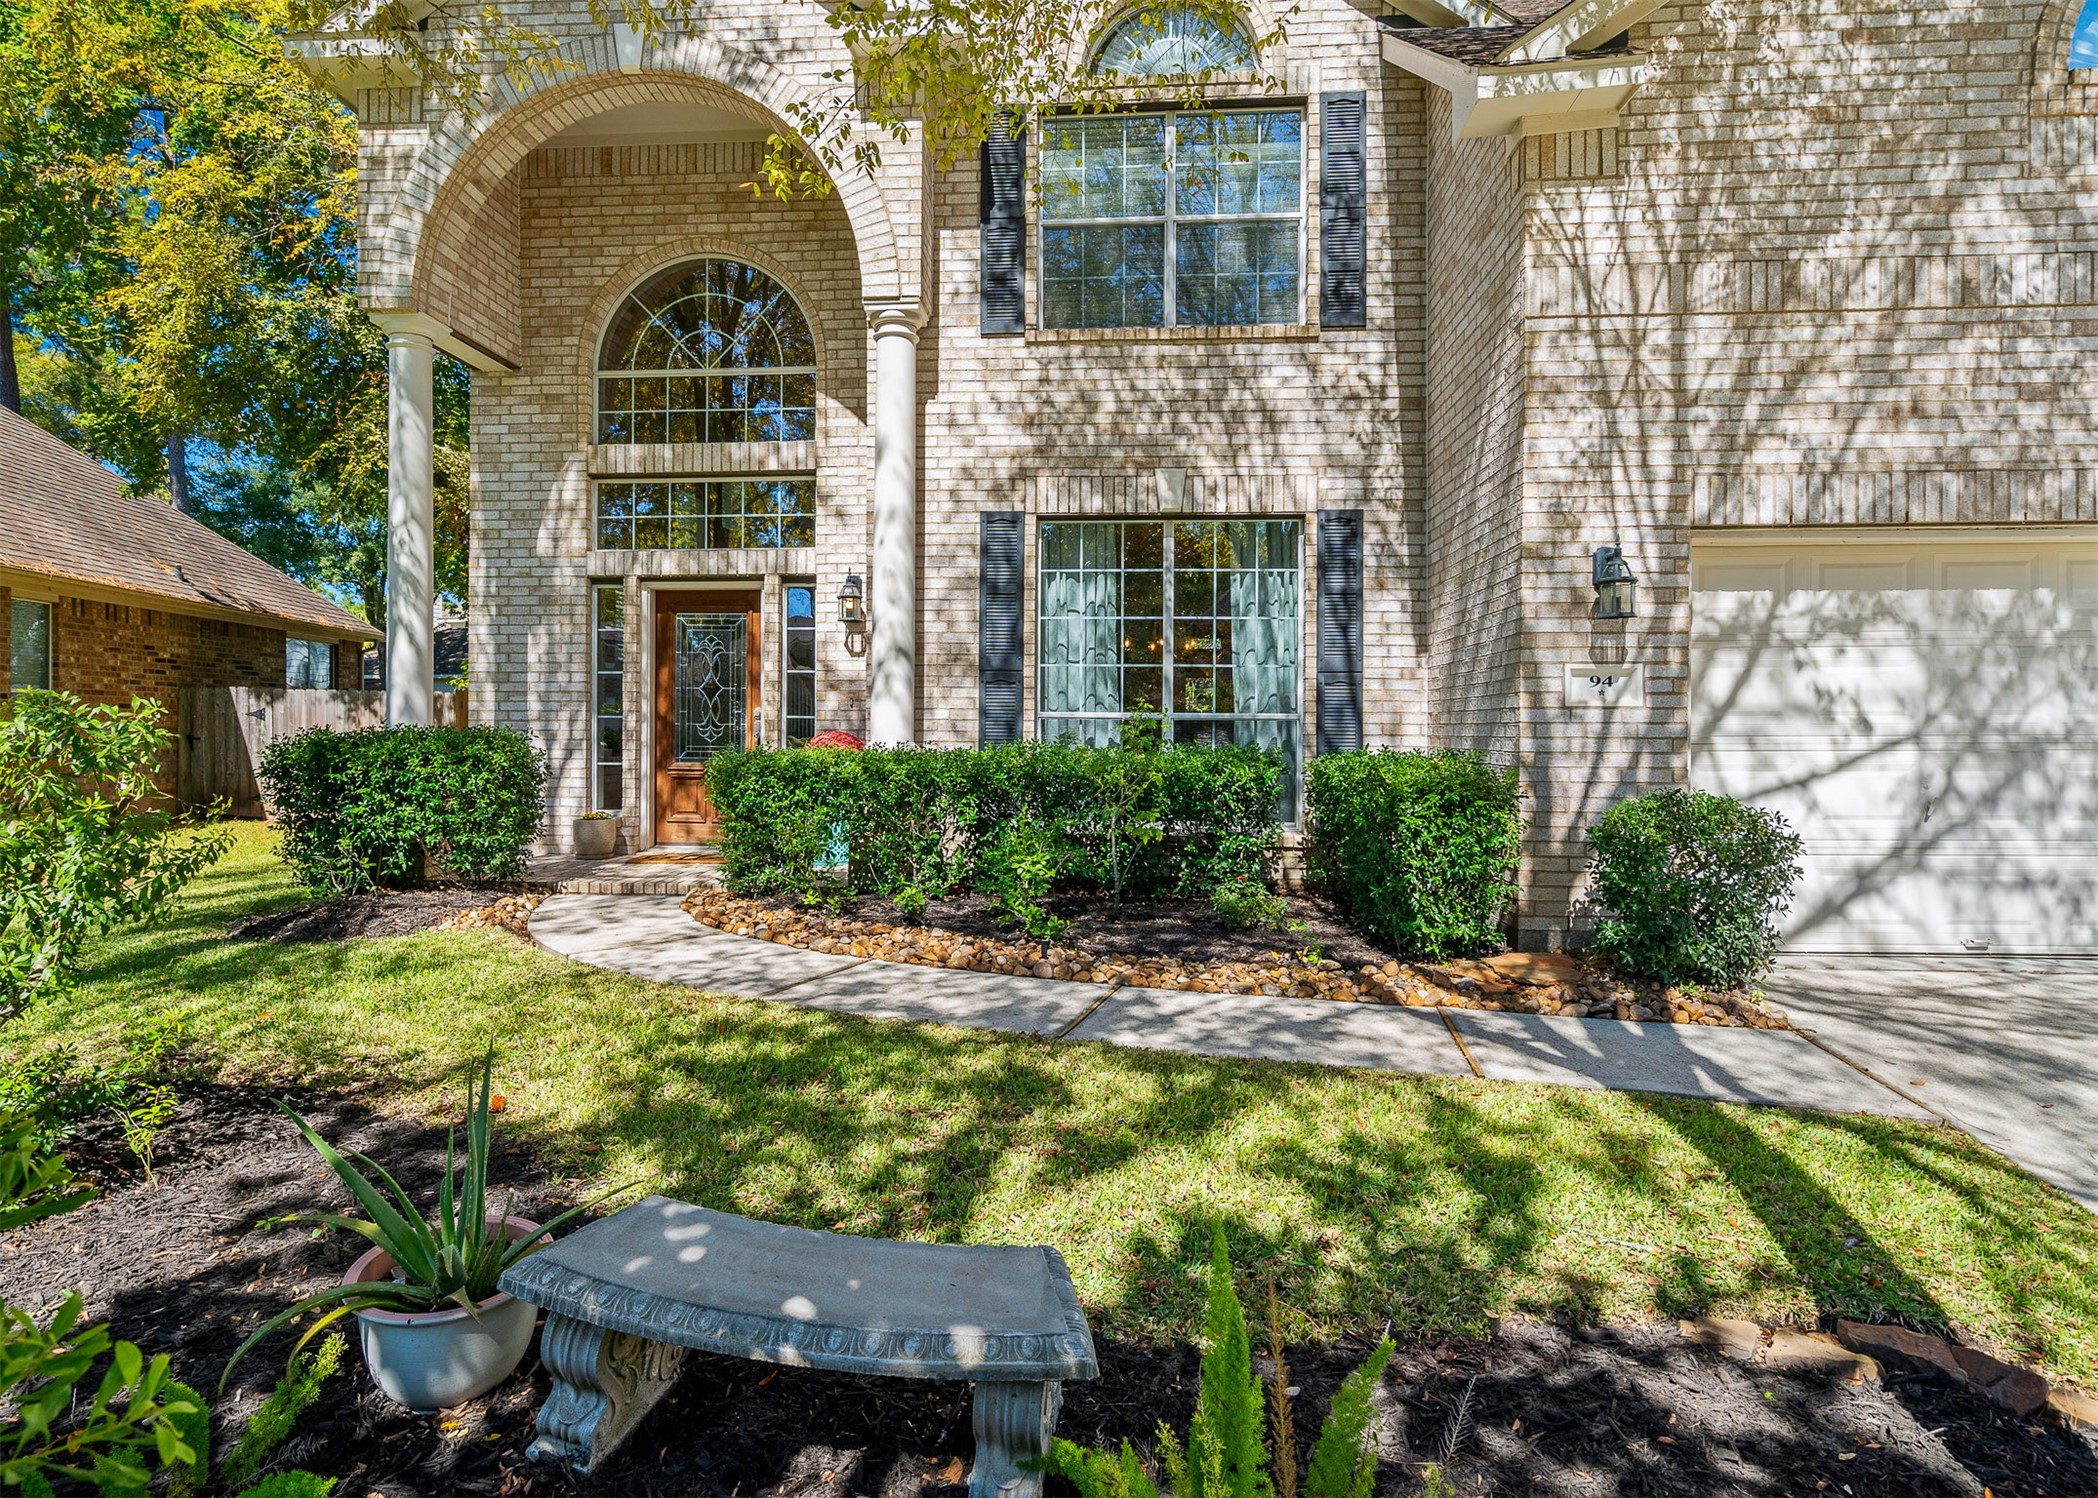 Great curb appeal with mature landscaping!